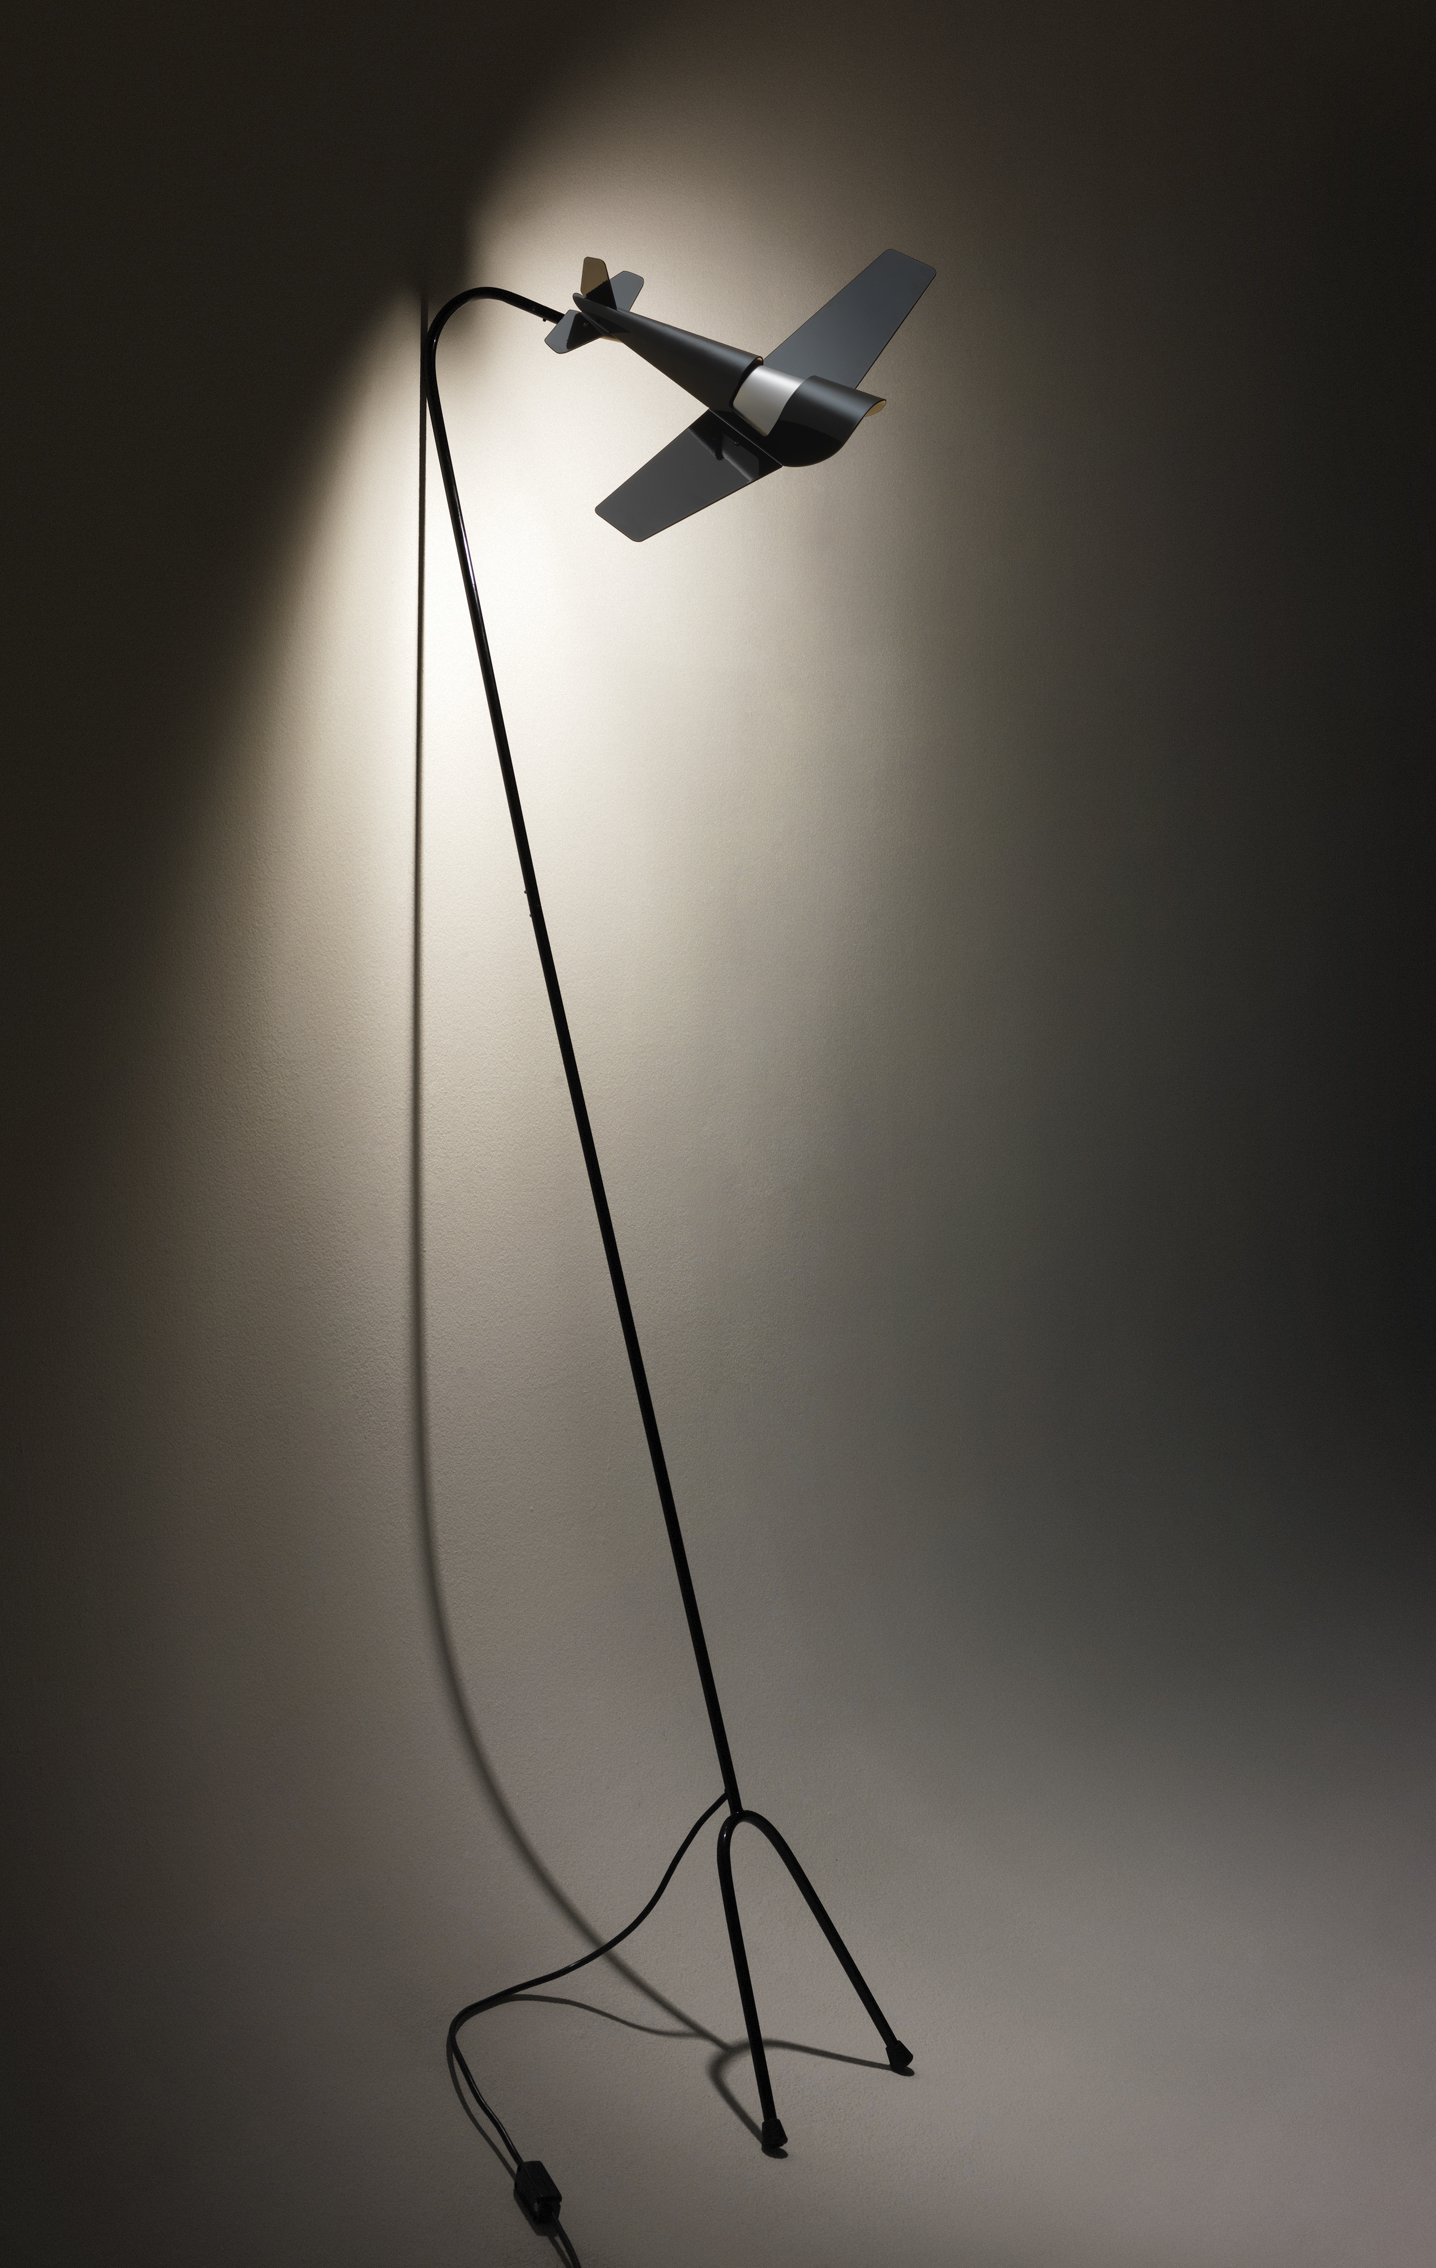  Aircraft Floor Lamp (prototype) | 2010 | Powder Coated Steel, Stainless Steel, 240v Lighting Components | 1.8M&nbsp; 